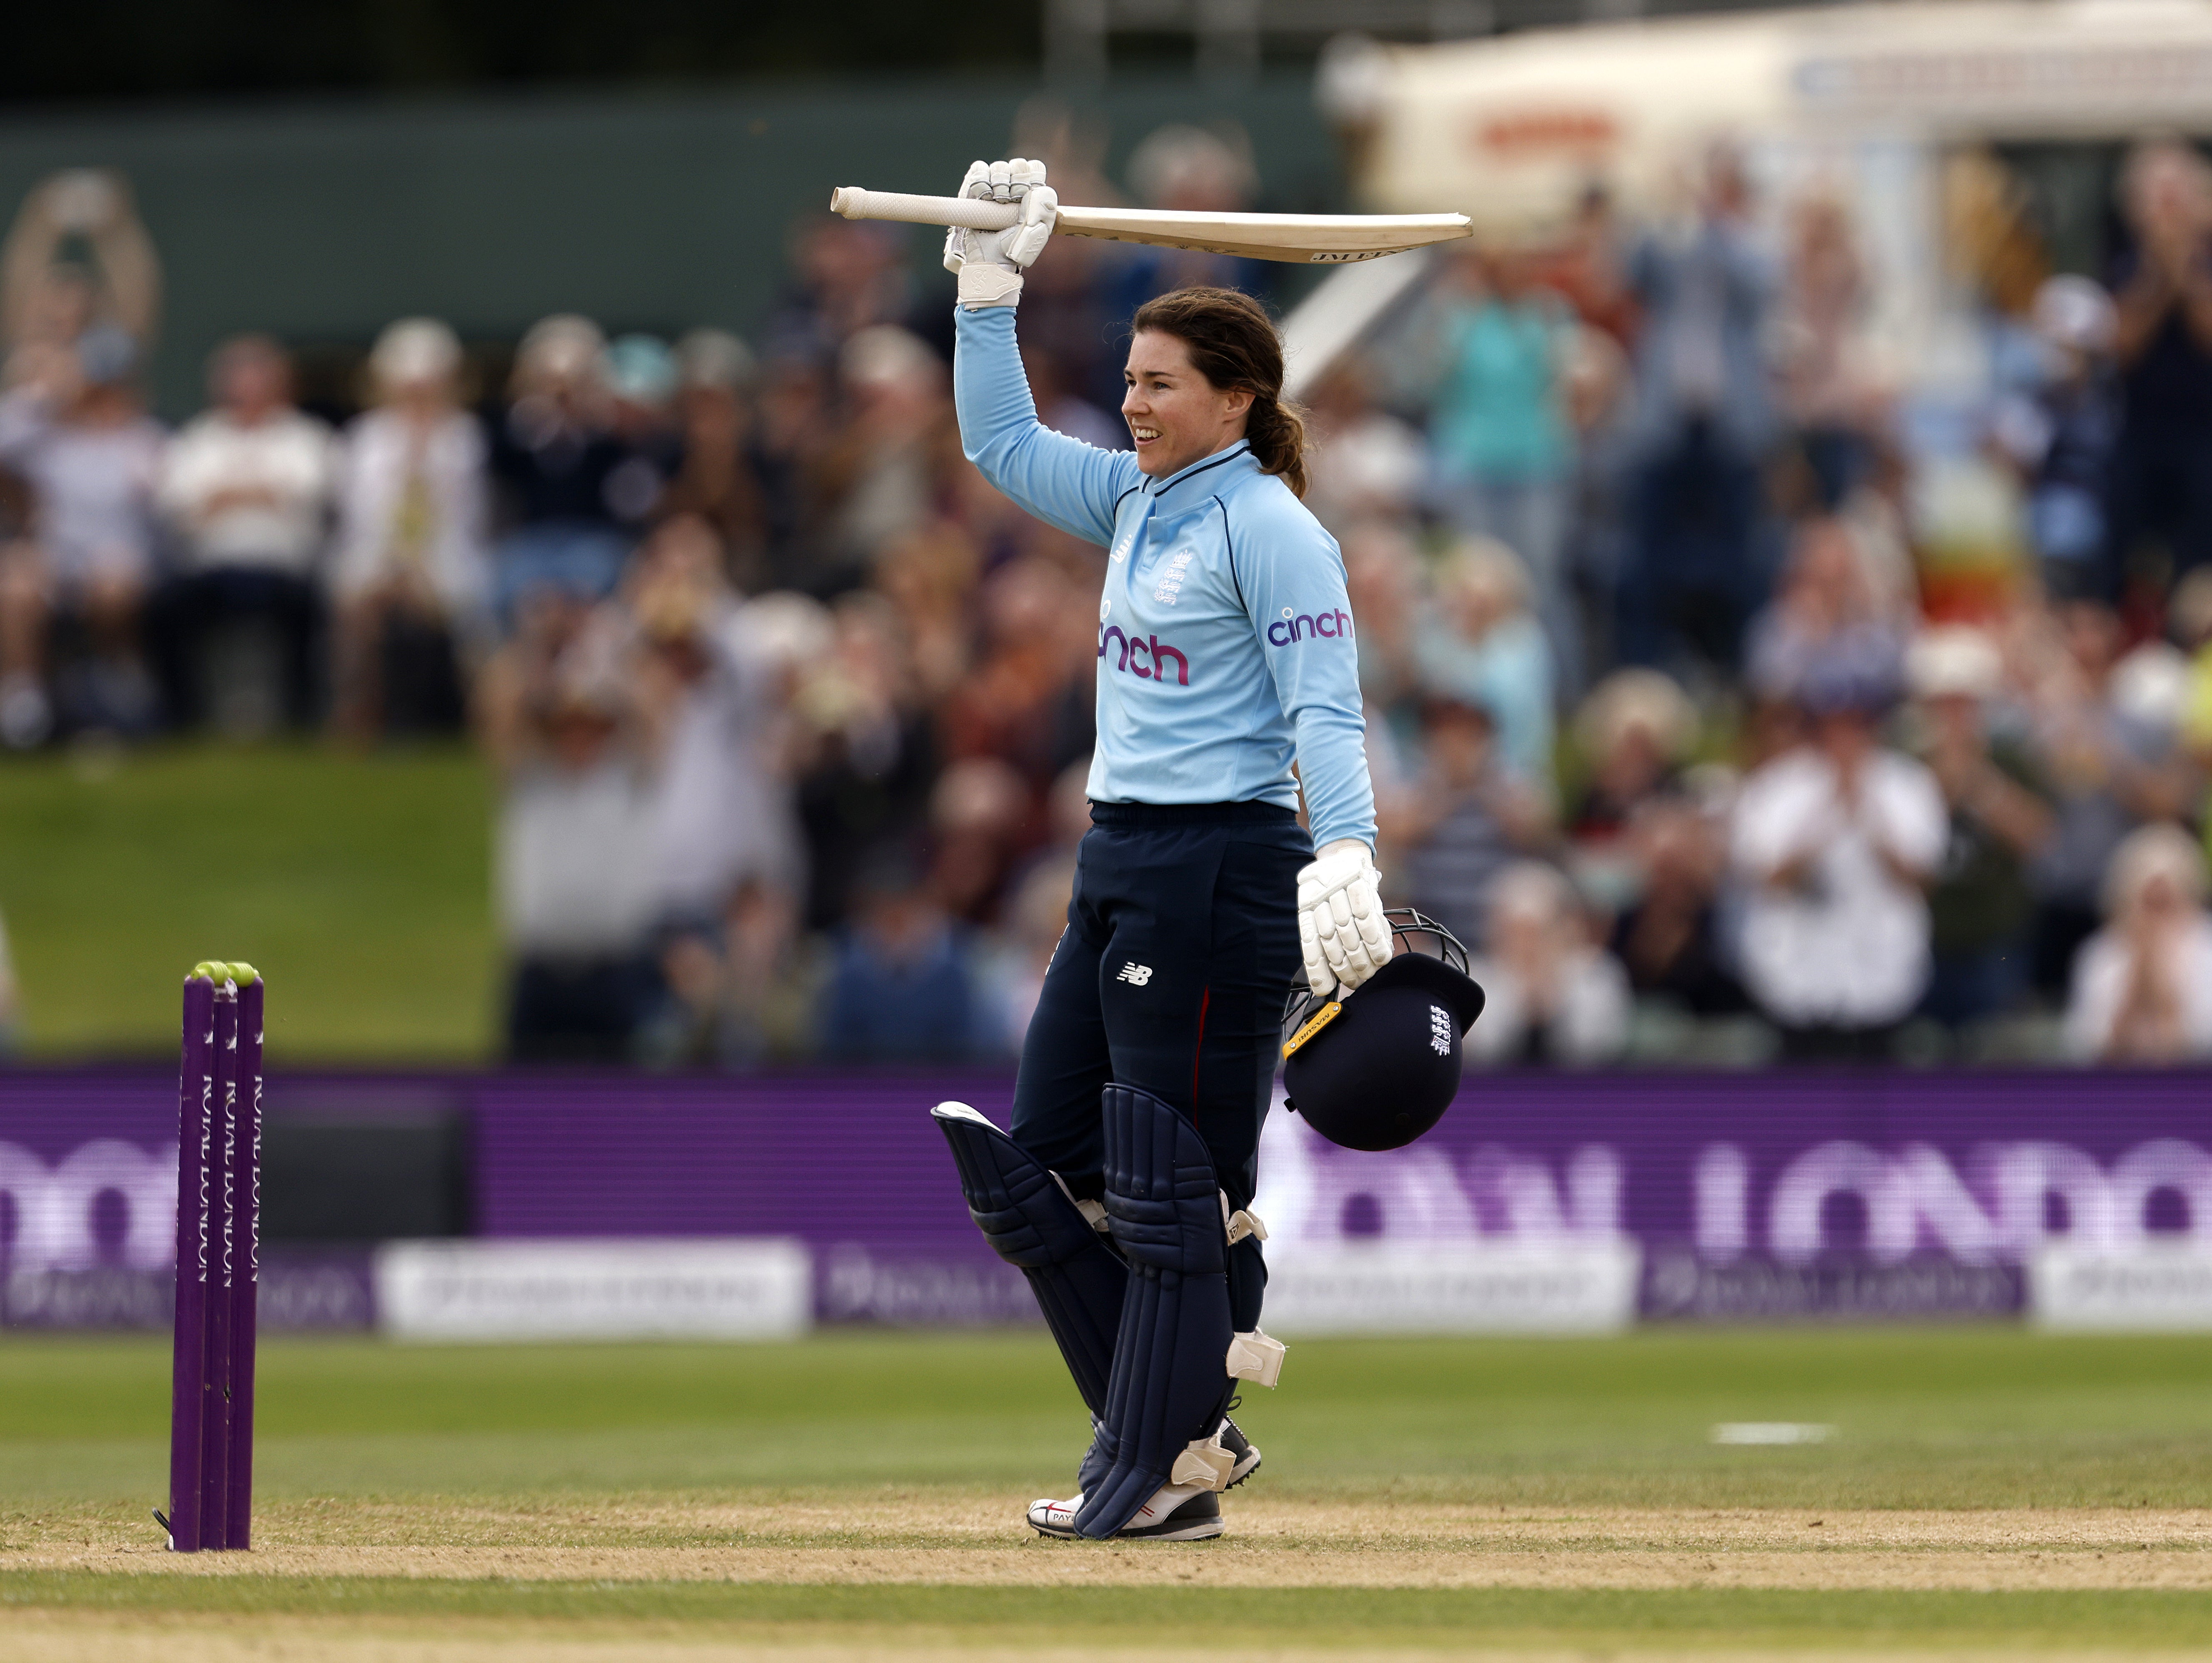 England’s Tammy Beaumont raises her bat after scoring a century in the one-day international against New Zealand at Canterbury (Steven Paston/PA)